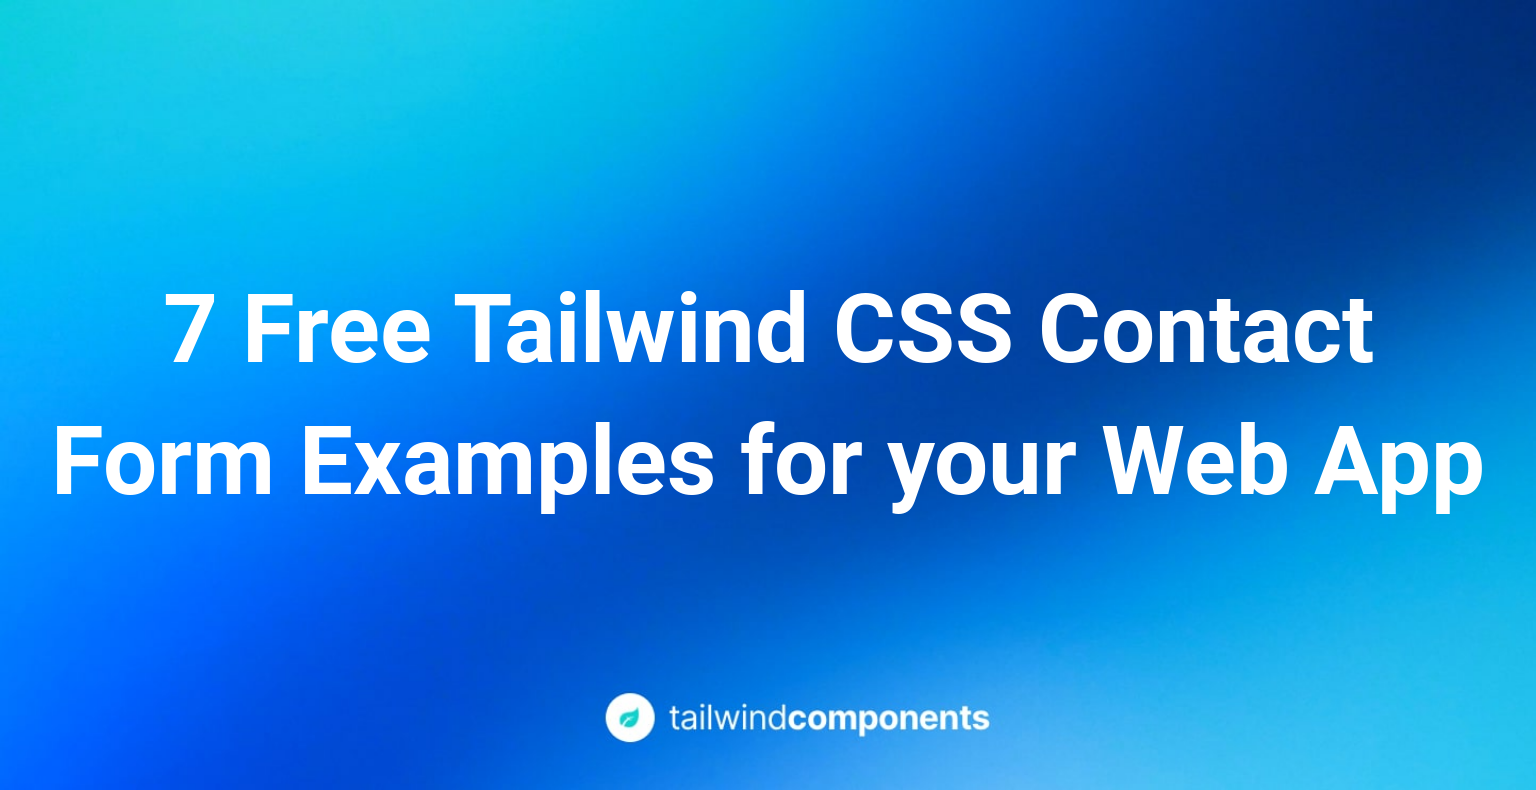 7 Free Tailwind CSS Contact Form Examples for your Web App Image